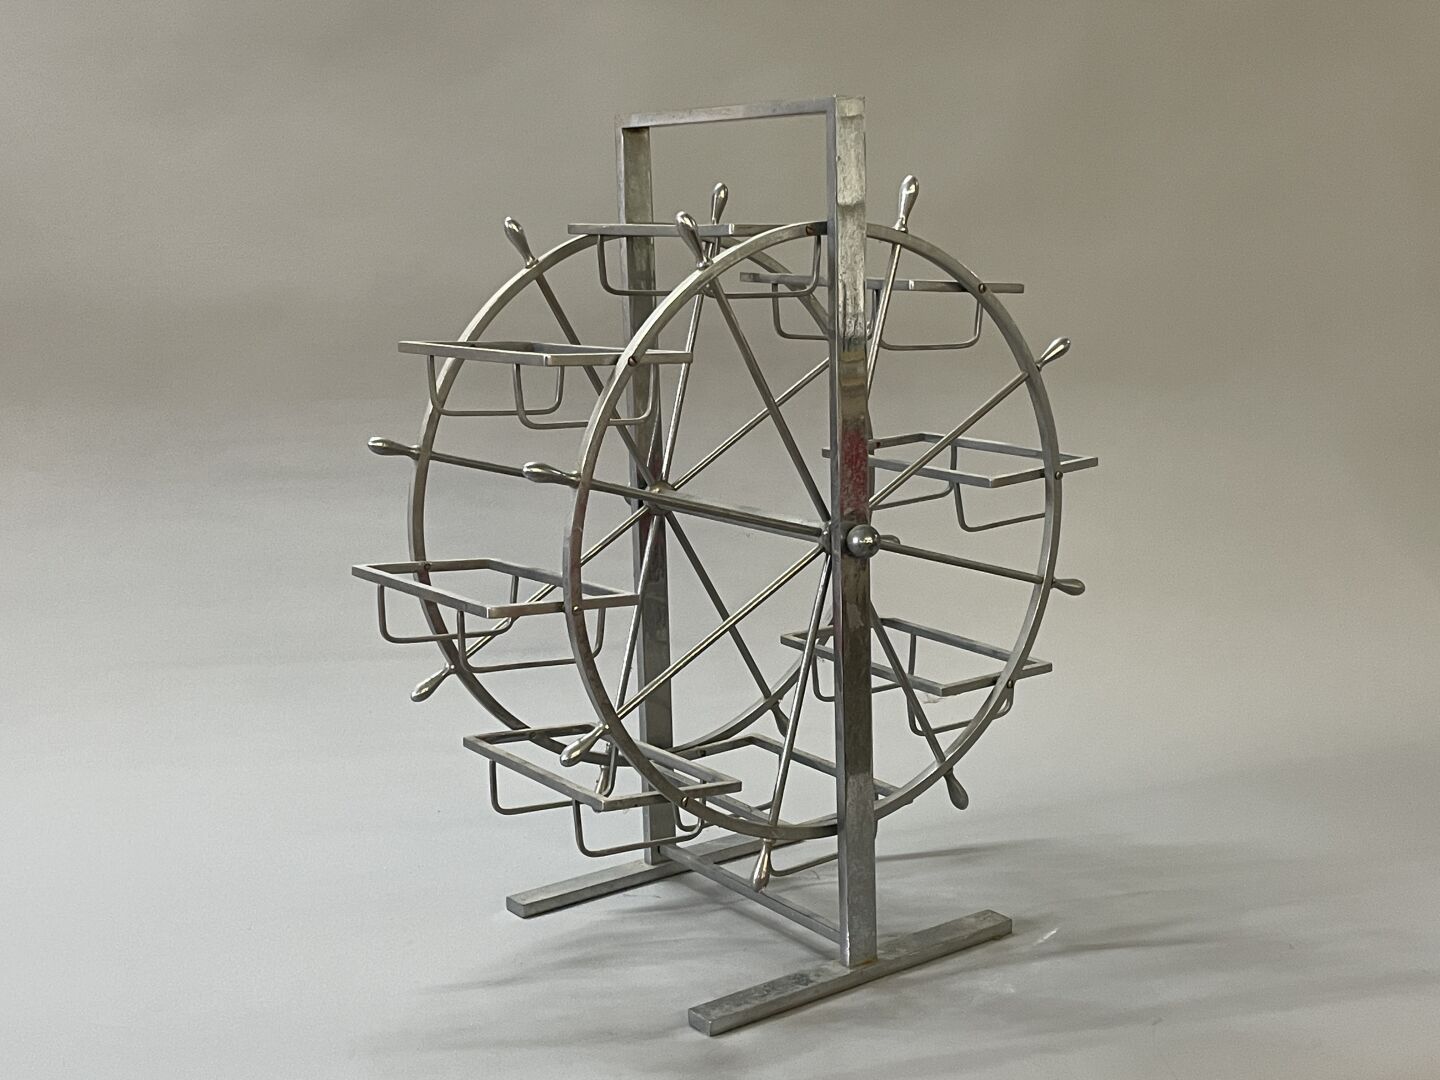 Null Servant forming especially of table in big metal wheel. 

47 x 41 x 22 cm.